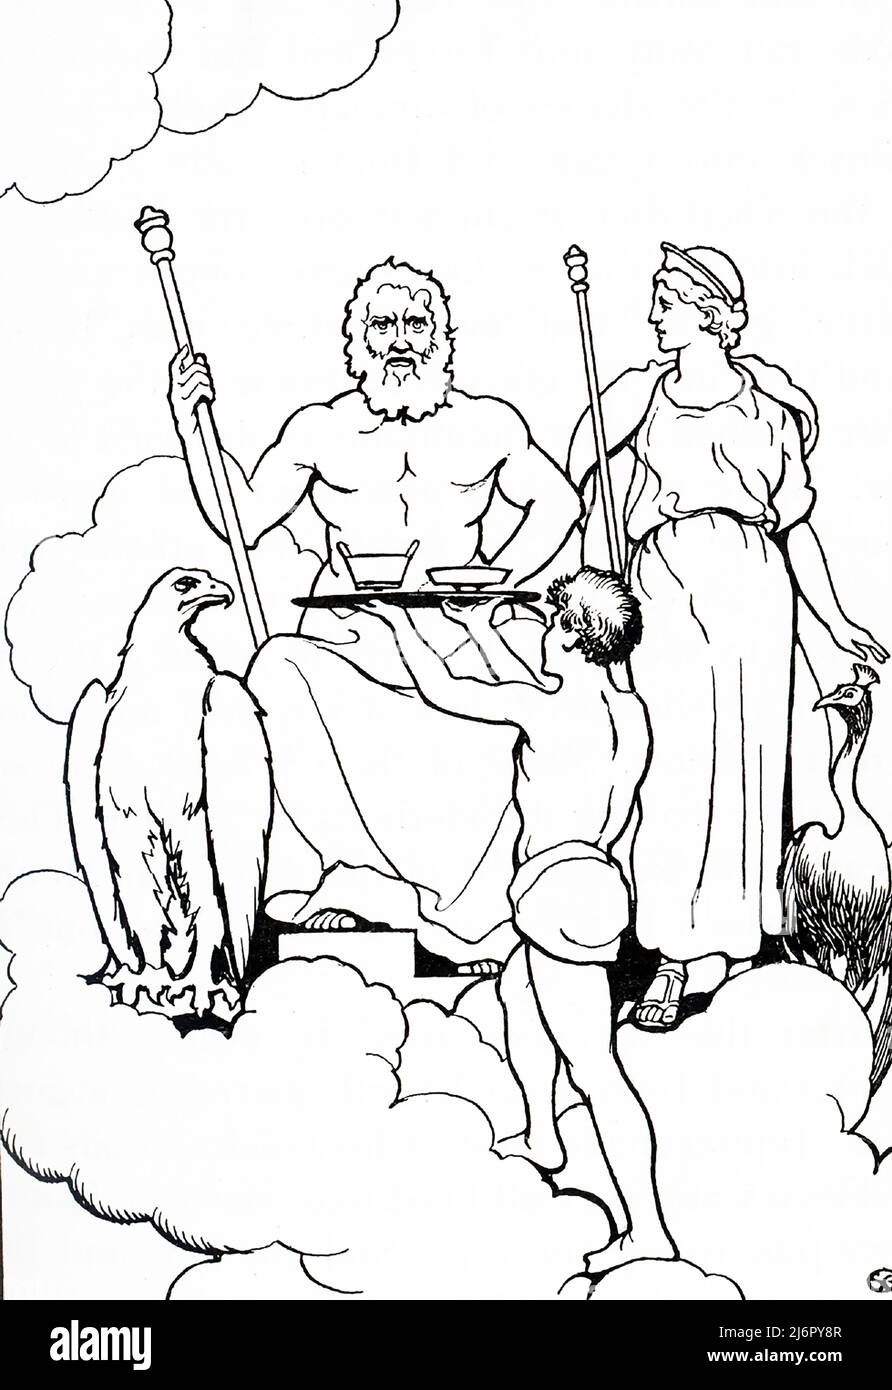 Jupiter, also known as Jove, is the god of sky and thunder,  as well as the king of gods in Ancient Roman Mythology. Jupiter is the top god of the Roman pantheon. Jupiter was considered the chief deity of Roman state religion during the Republican and Imperial eras until Christianity became the dominant religion. Here on his throne on Mount Olympus, he has his eagle with him. The eagle served as Jupiter’s personal messenger. Myths said an eagle have carried the youth Ganymede to Olympus, where he served as the gods' cupbearer. Jupiter was known to the Greeks as Zeus. Stock Photo